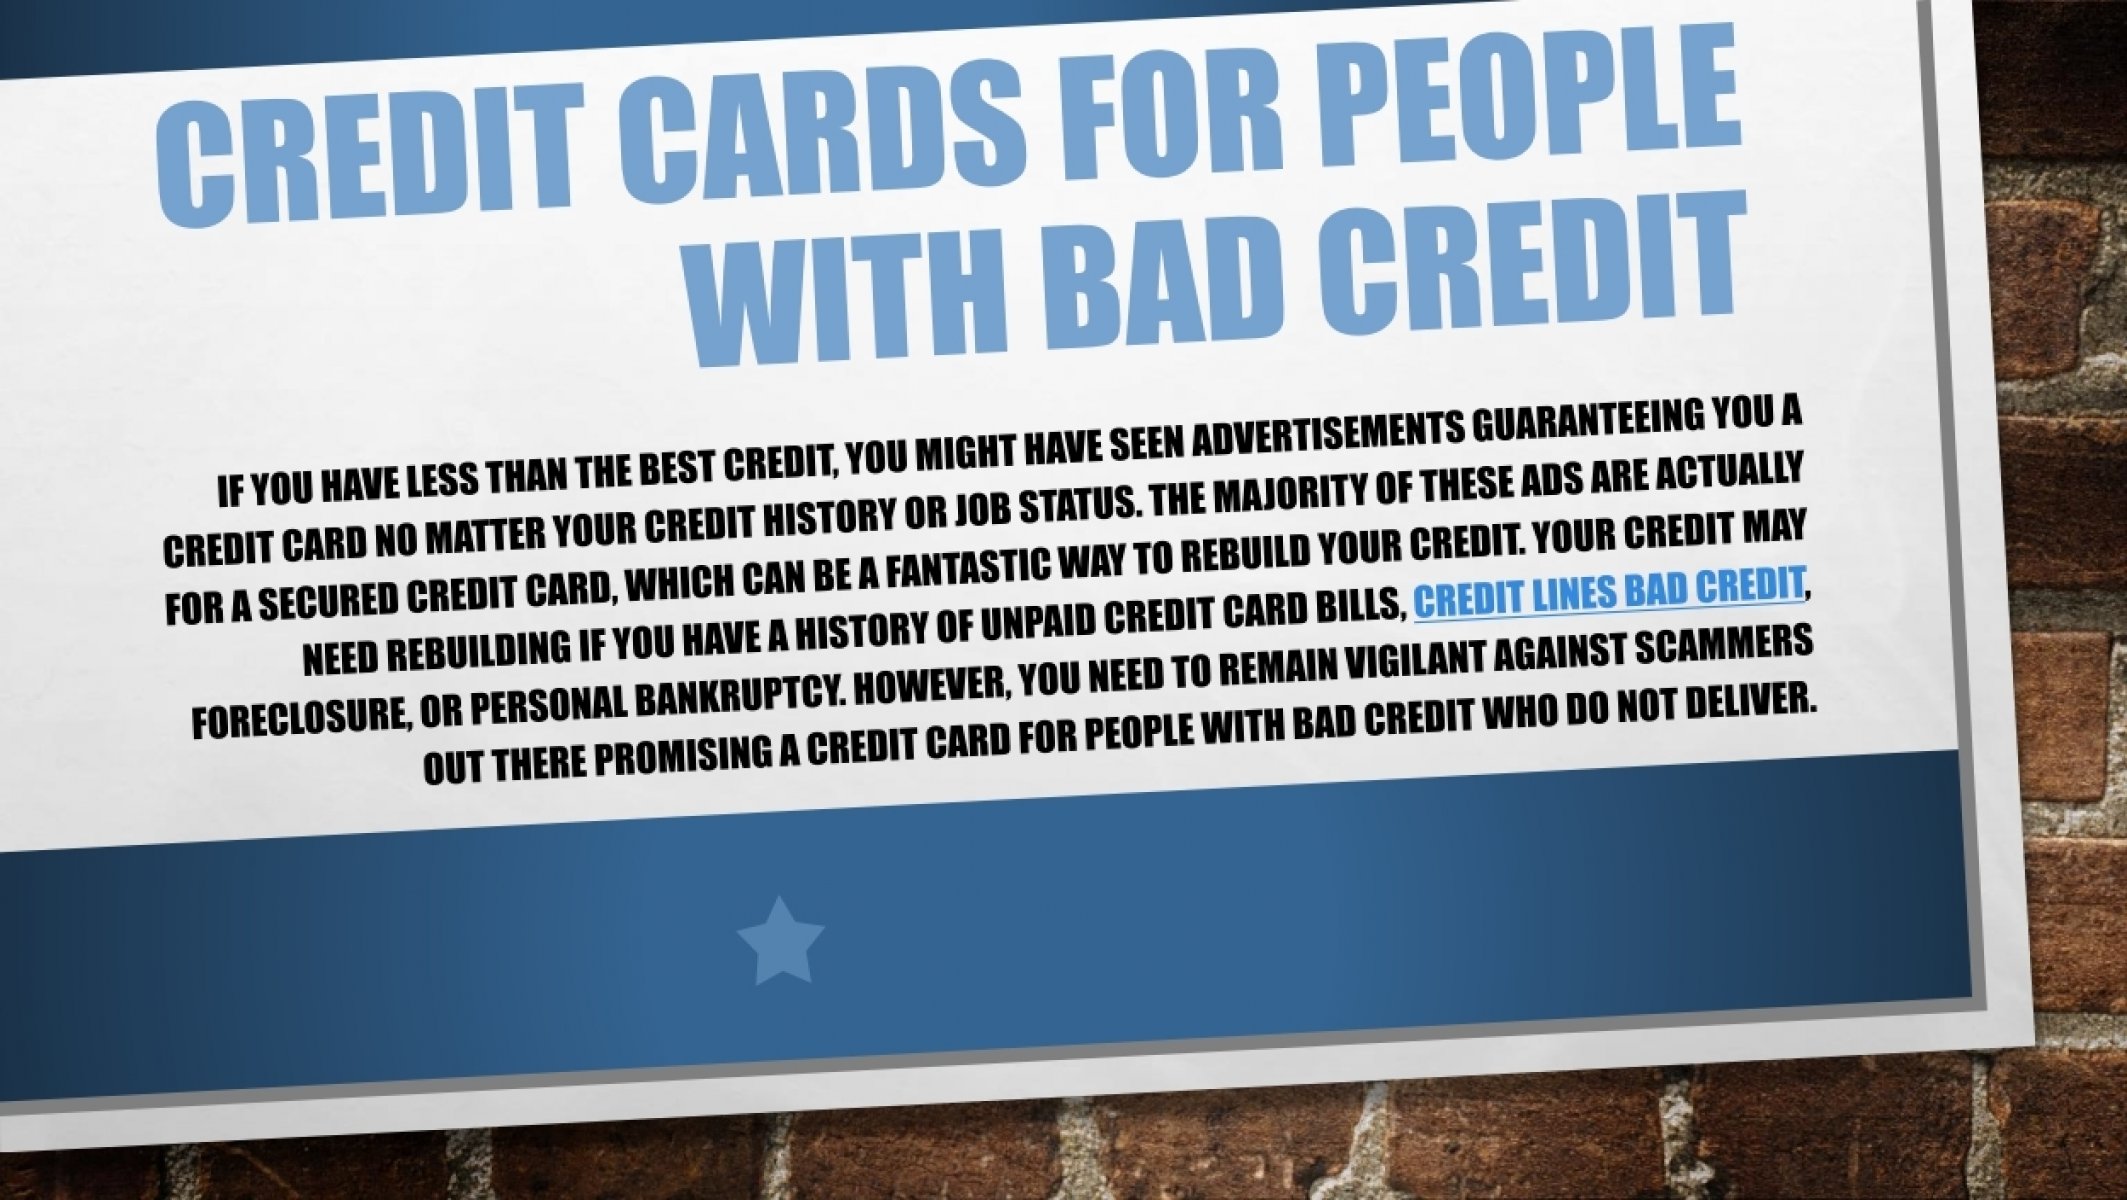 how to take cash advance on credit card